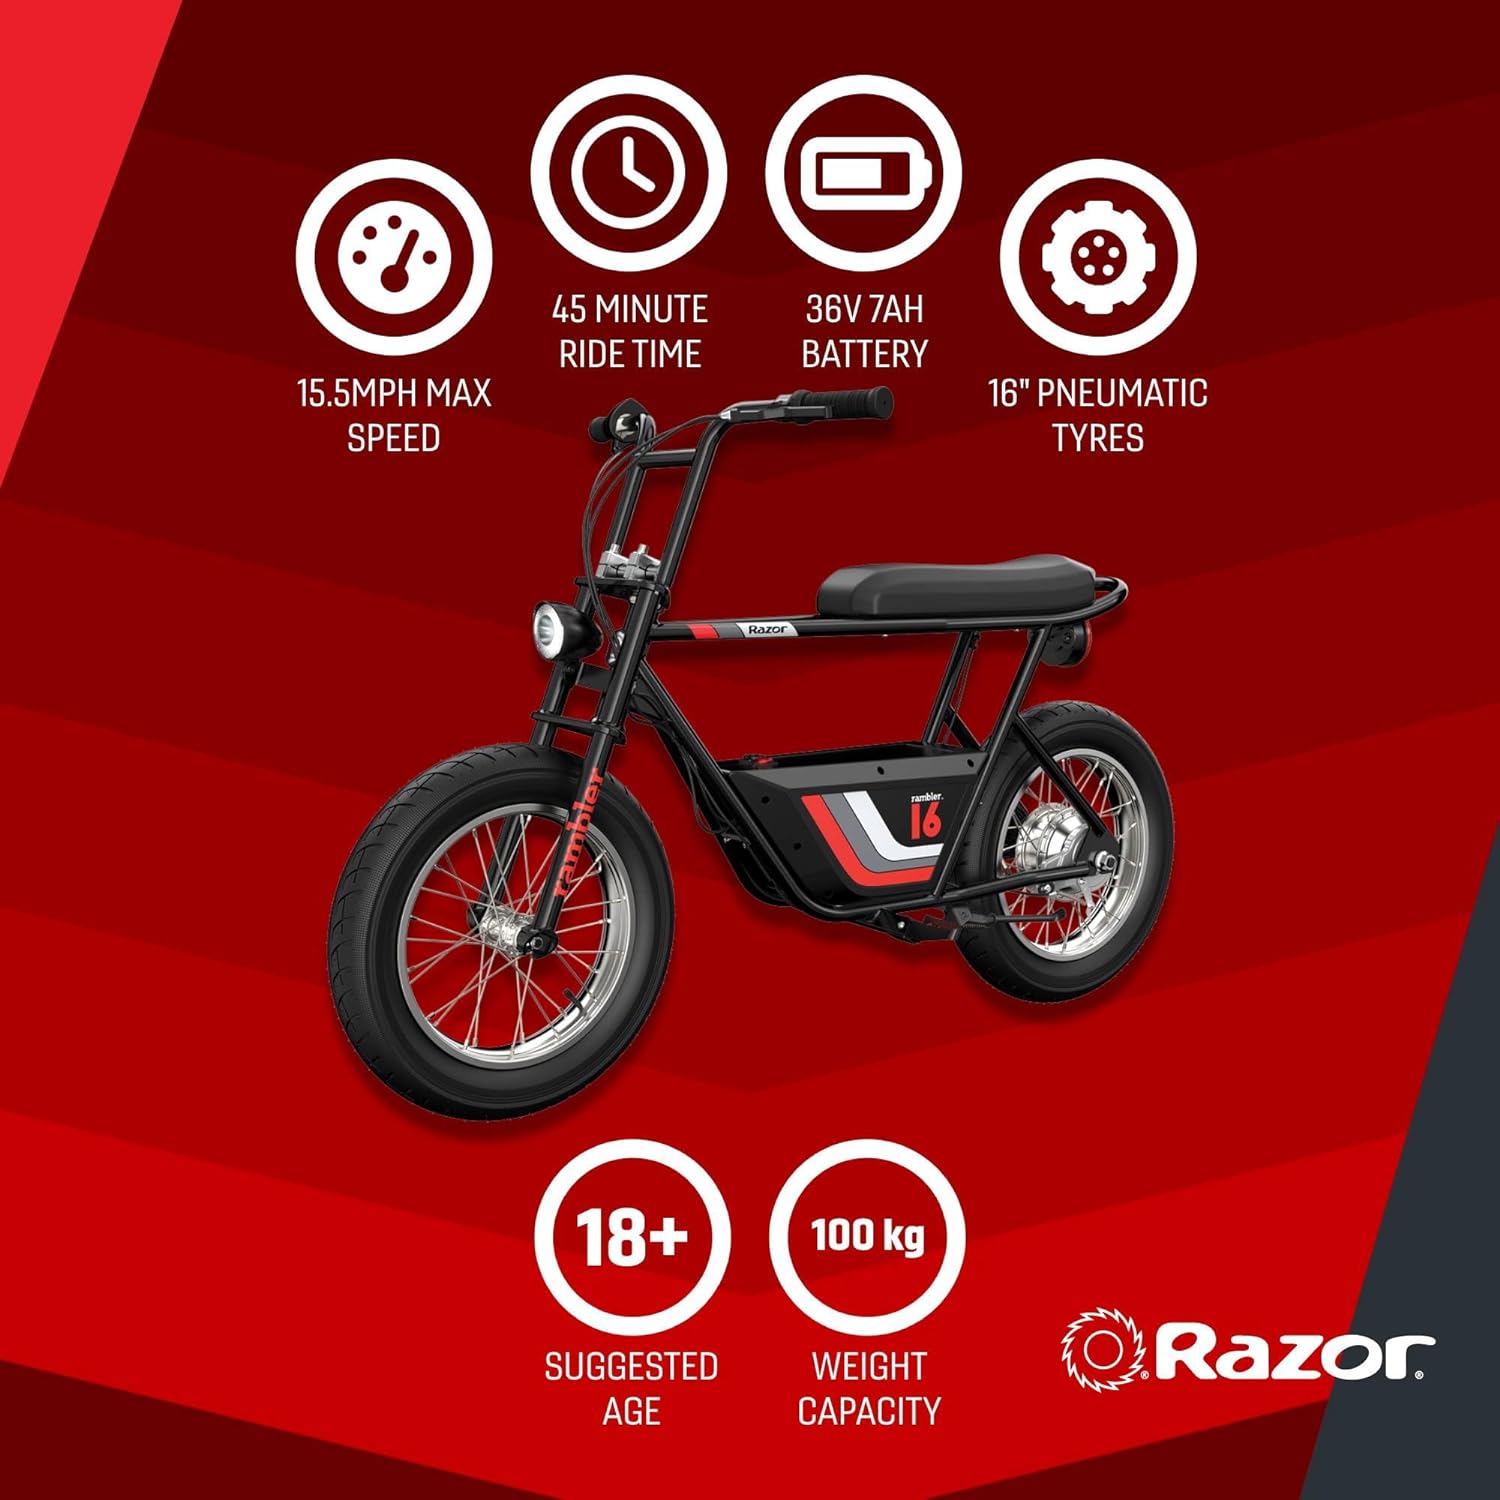 Razor Rambler Electric Minibike with Retro Style Up to 15.5 MPH